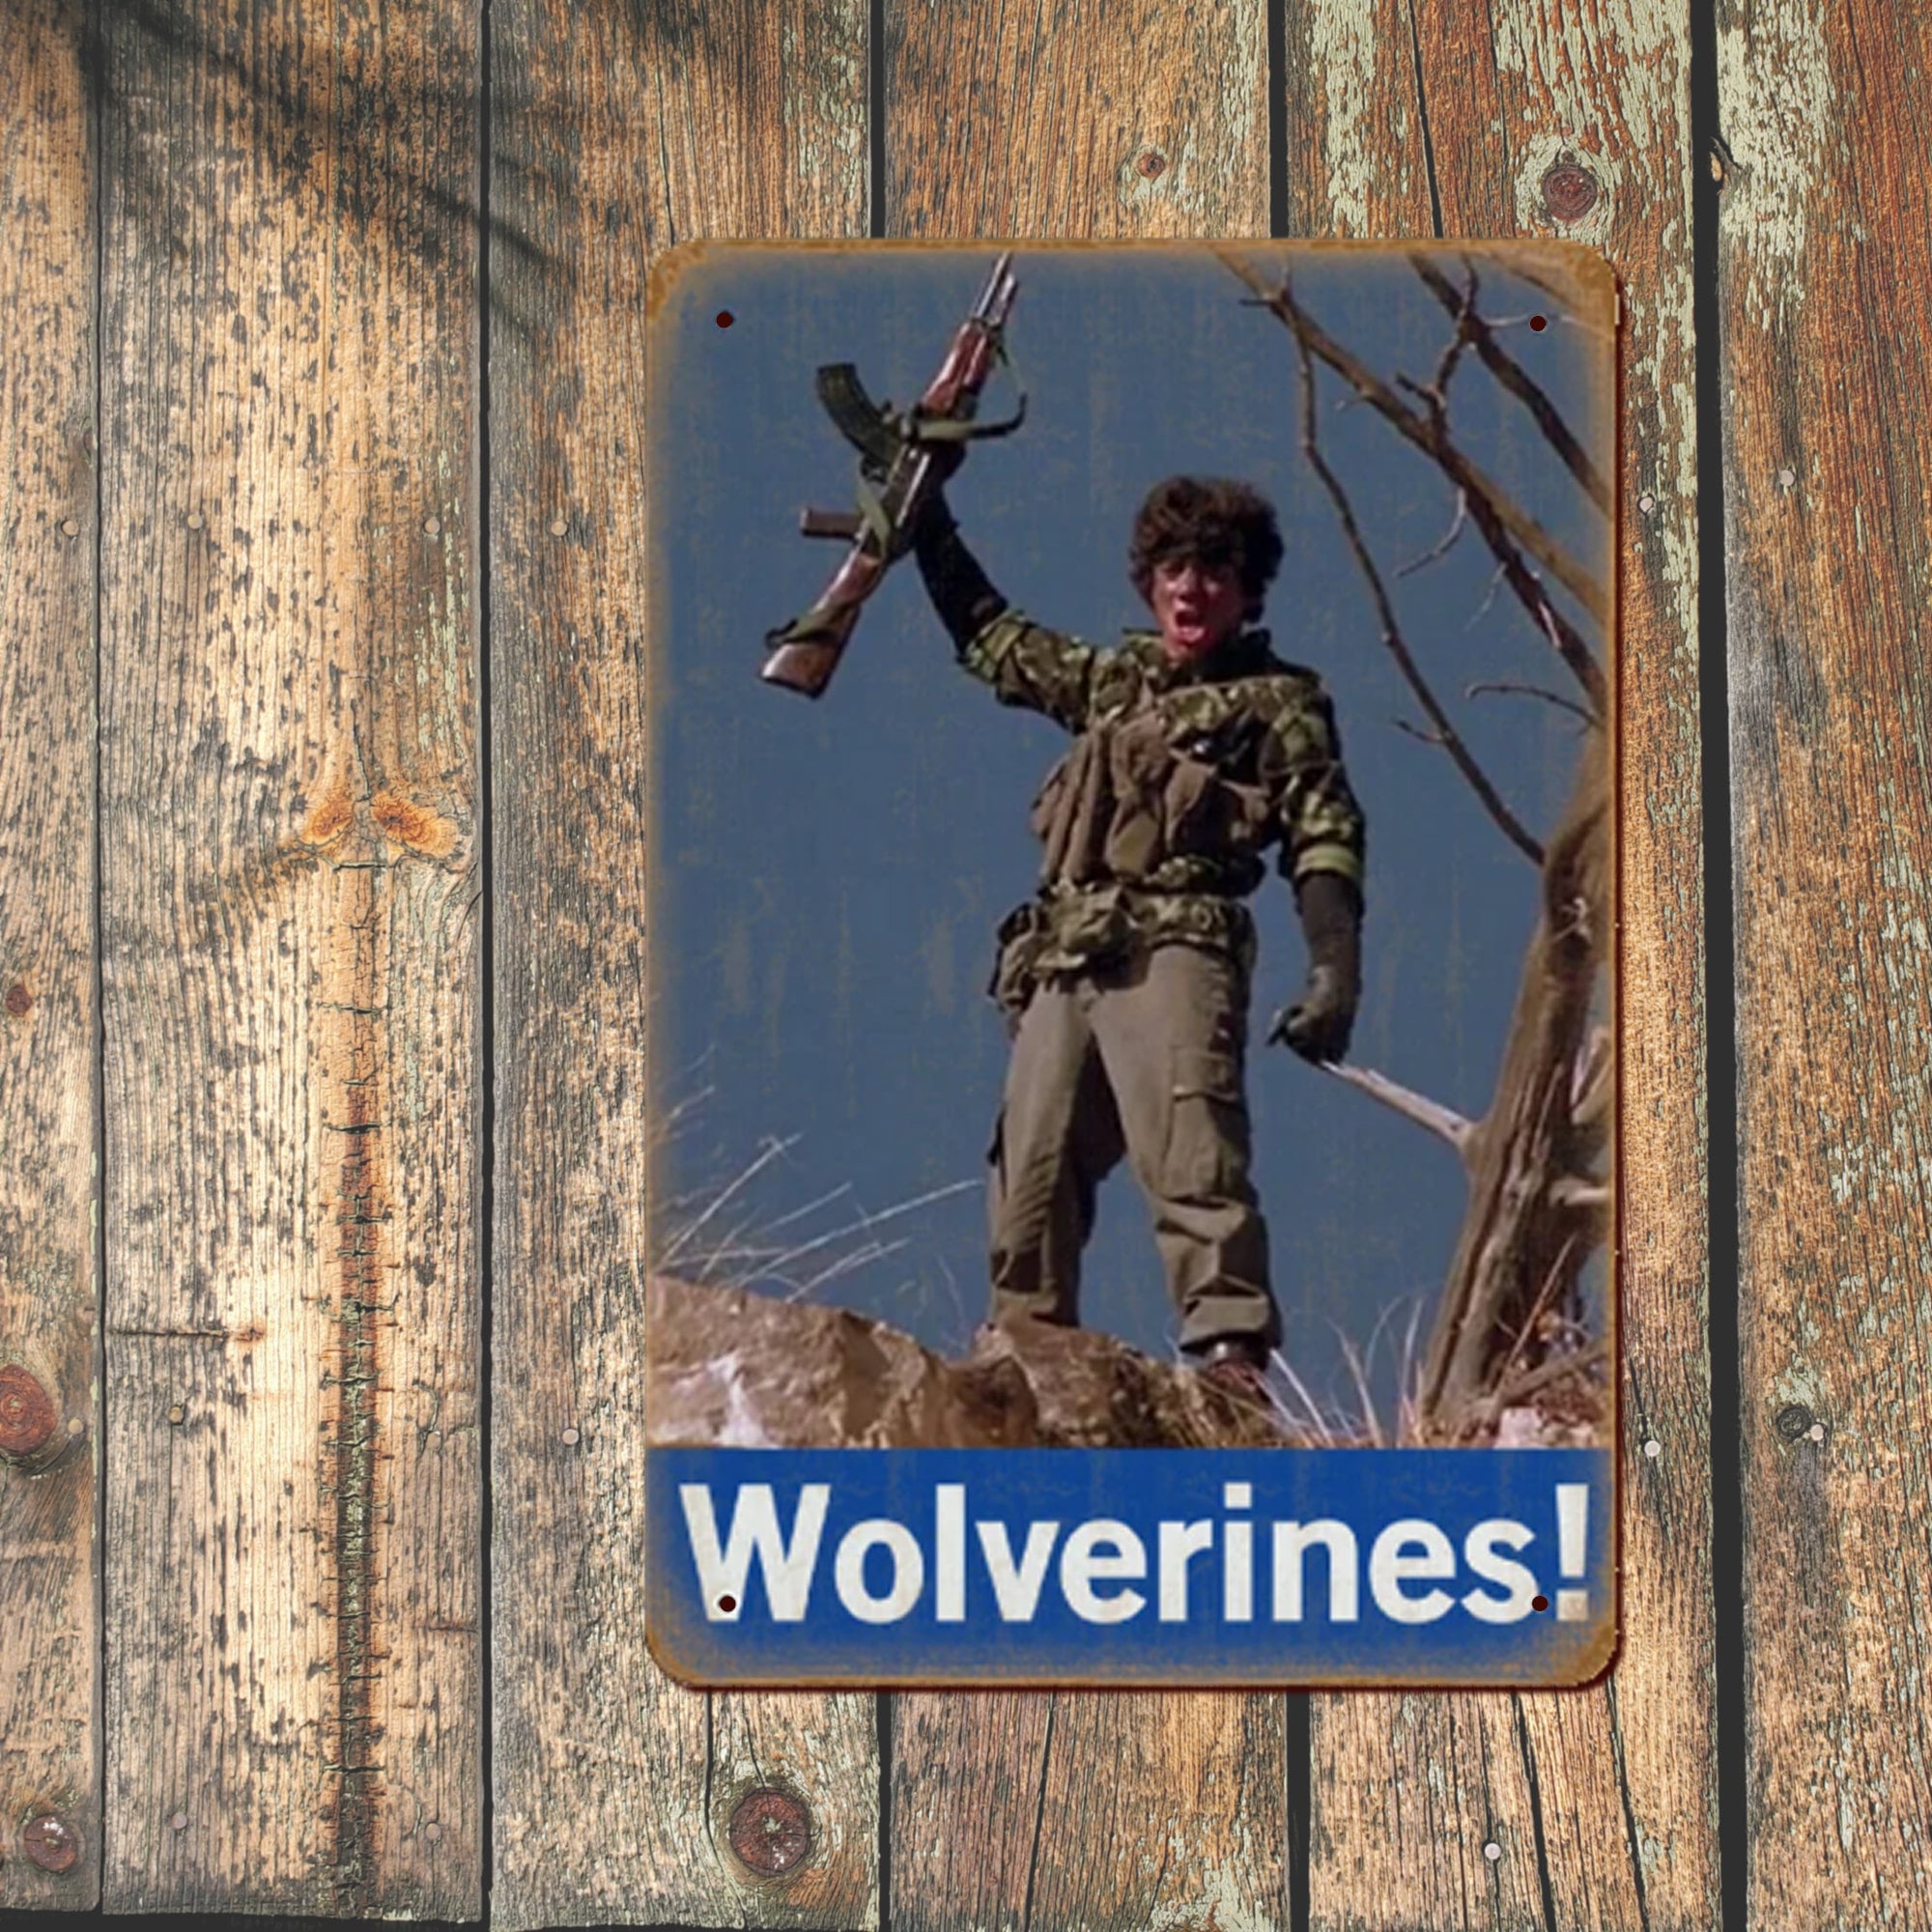 Red Dawn Code Words (and WOLVERINES!)